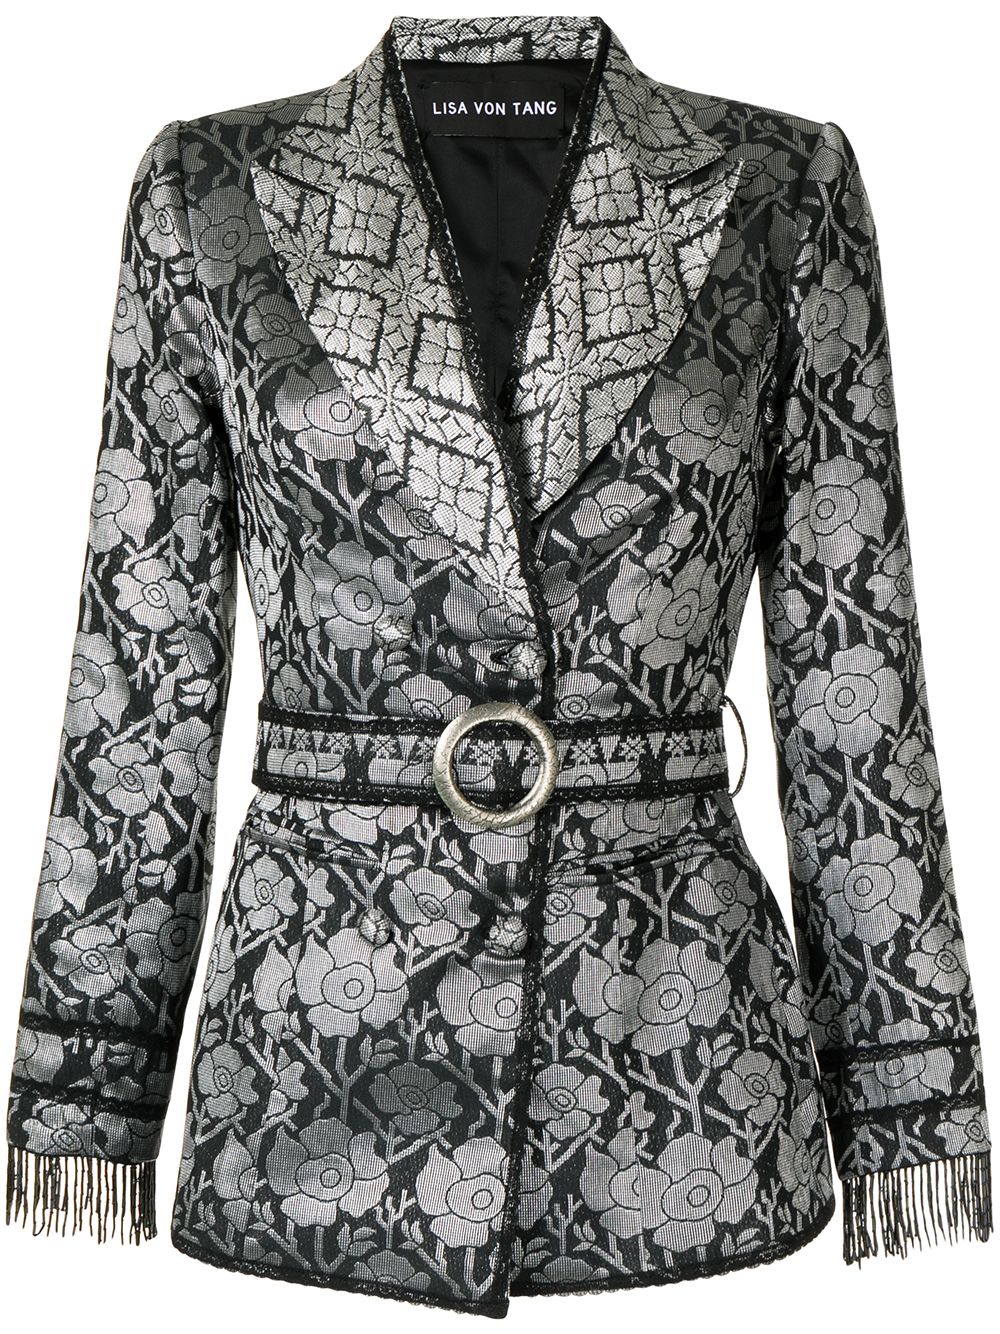 Image 1 of Lisa Von Tang double-breasted brocade blazer